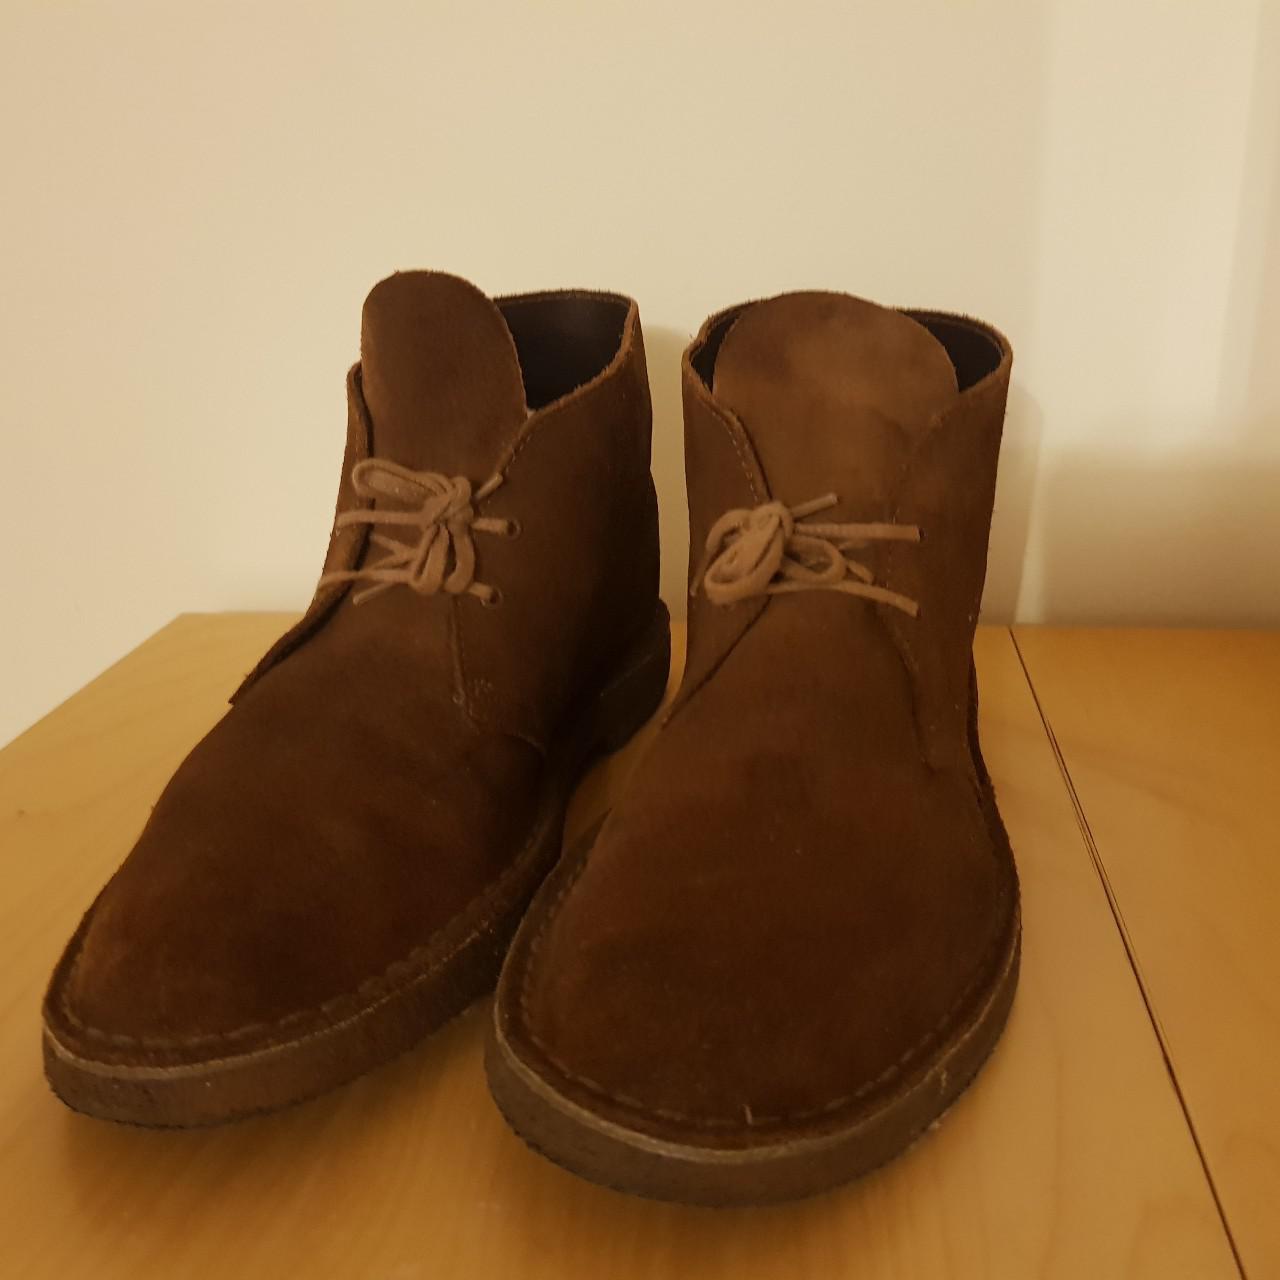 Product Image 1 - Clarks brown suede boots in